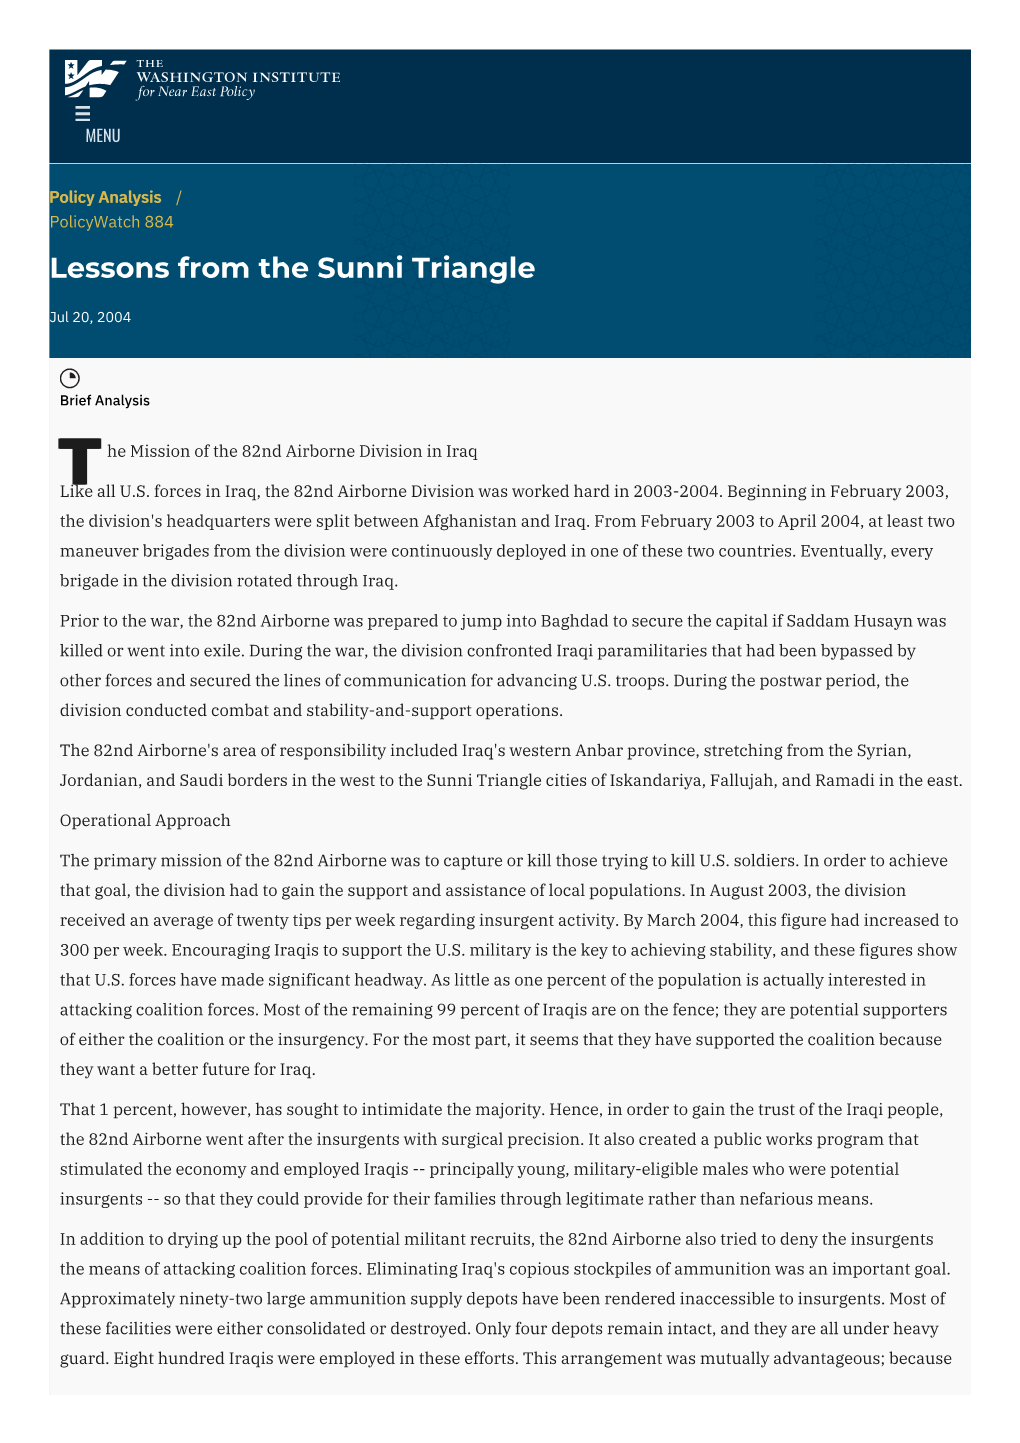 Lessons from the Sunni Triangle | the Washington Institute